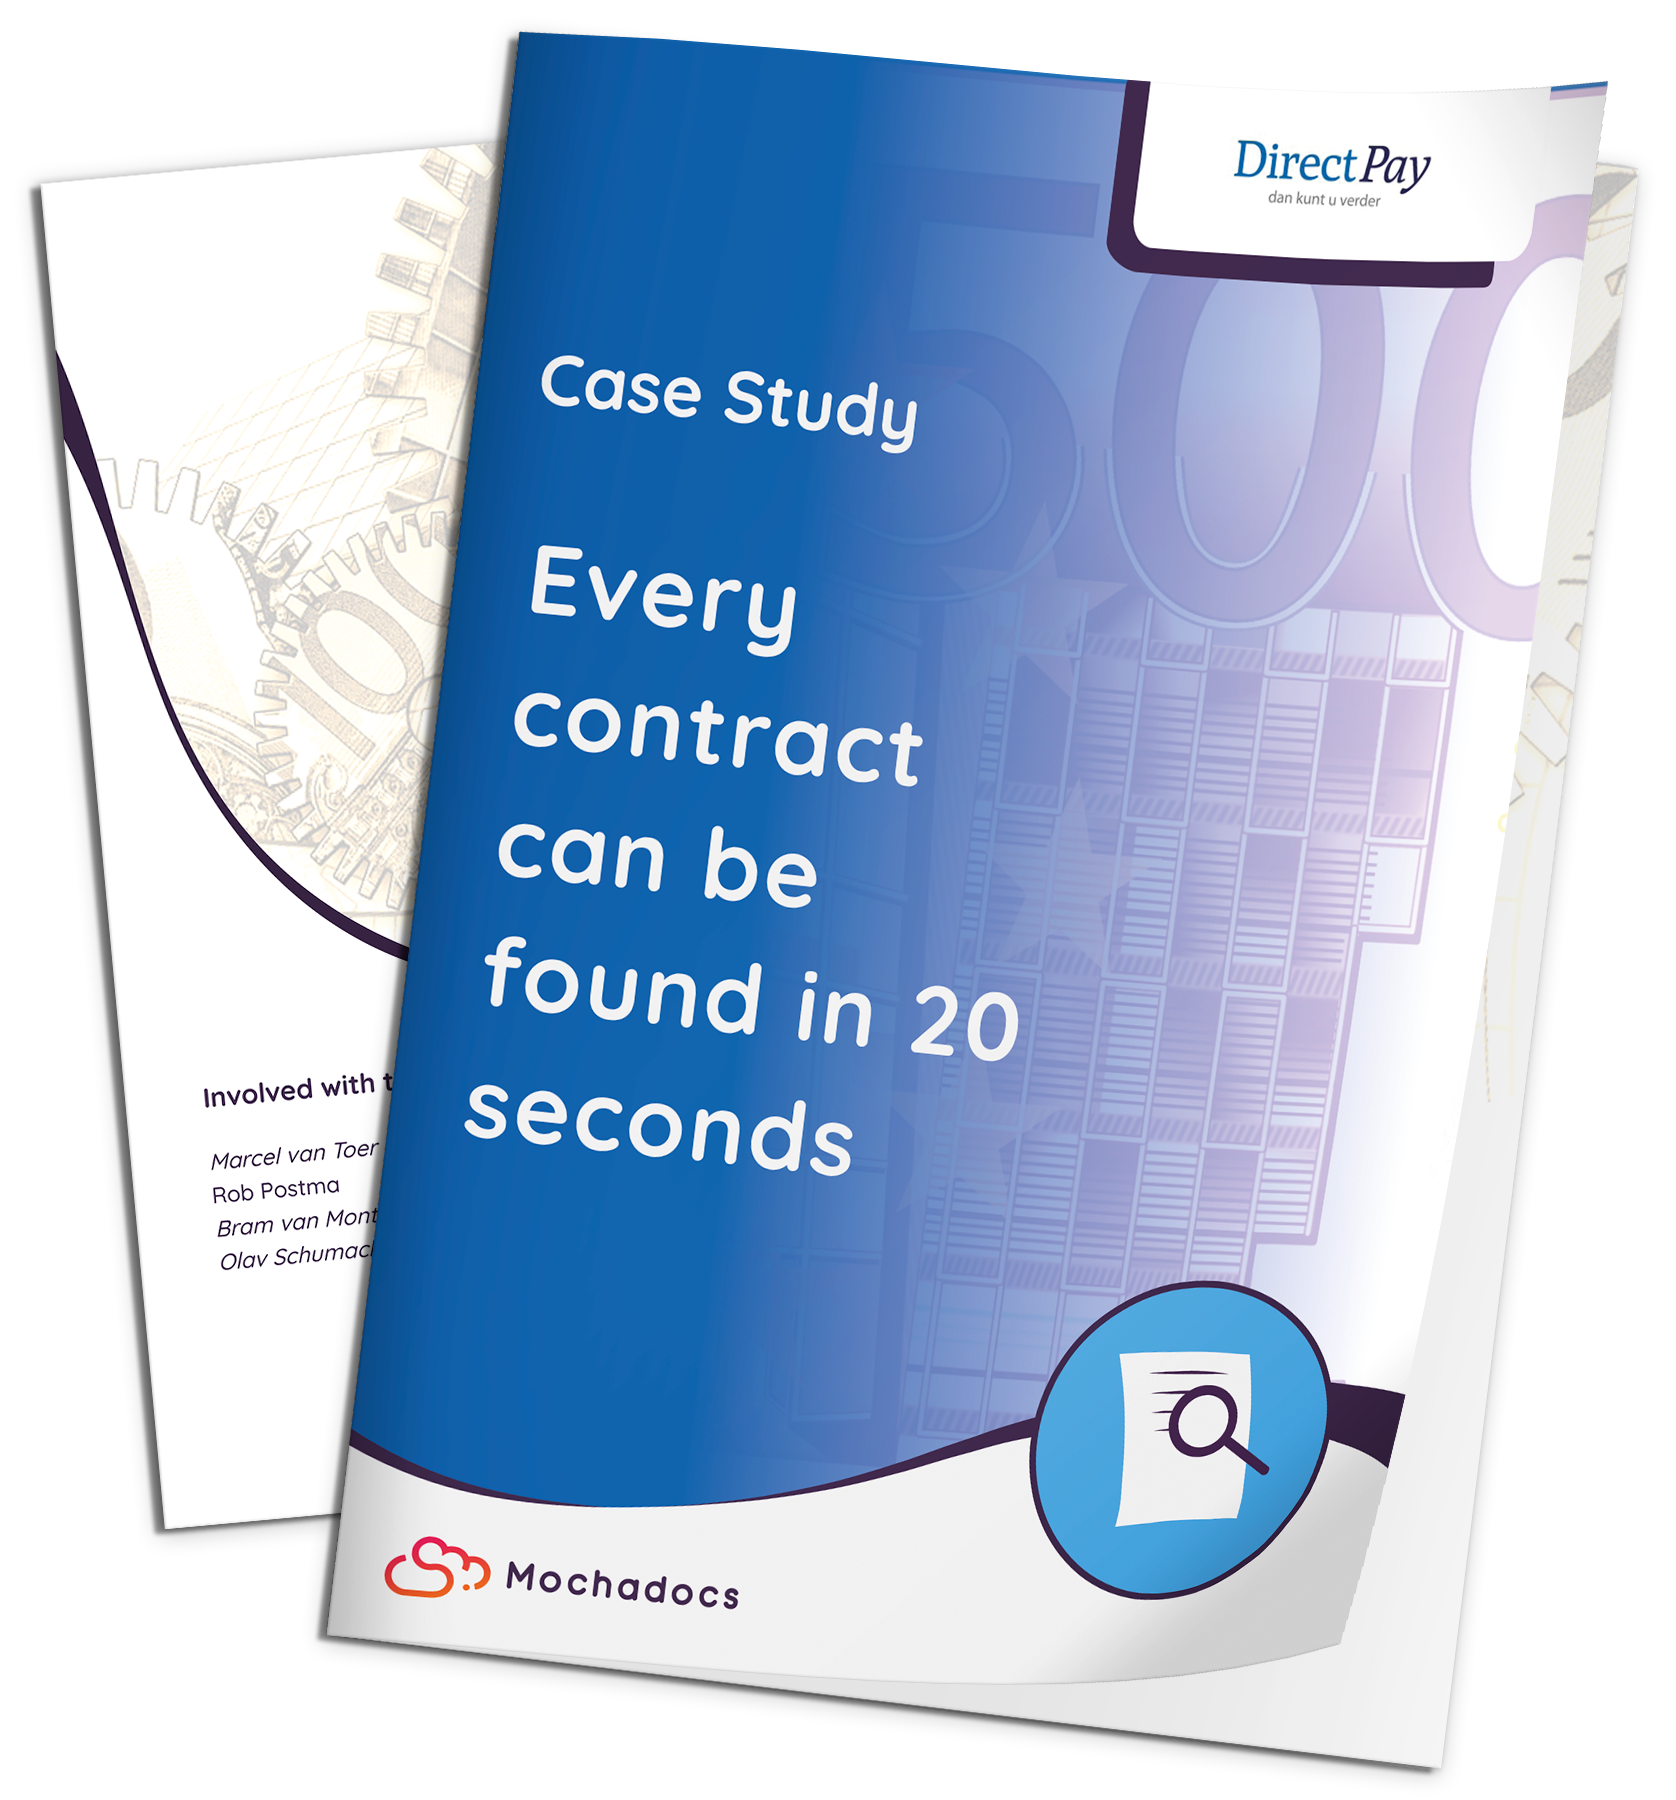 Mochadocs - Contract Management - Case Study - DirectPay - Every contract can be found in 20 seconds